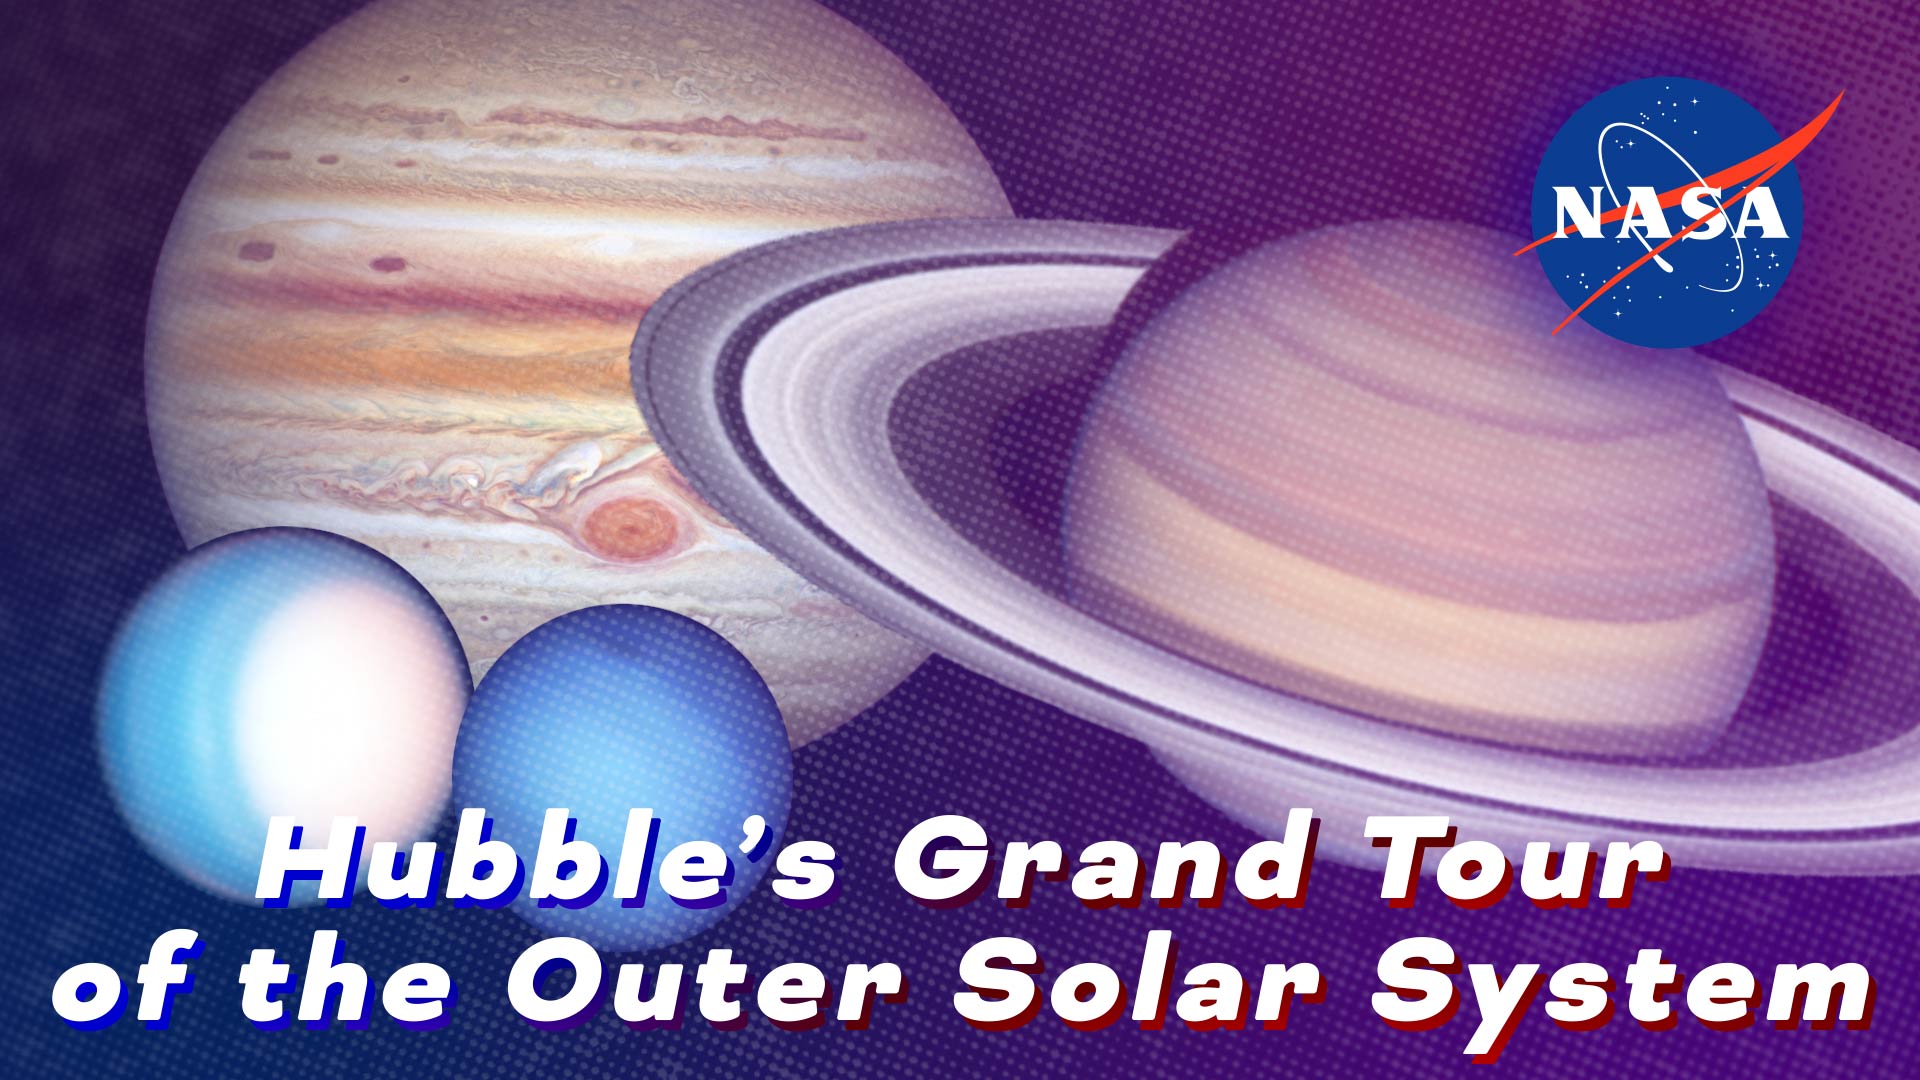 Preview Image for Hubble’s Grand Tour of the Outer Solar System